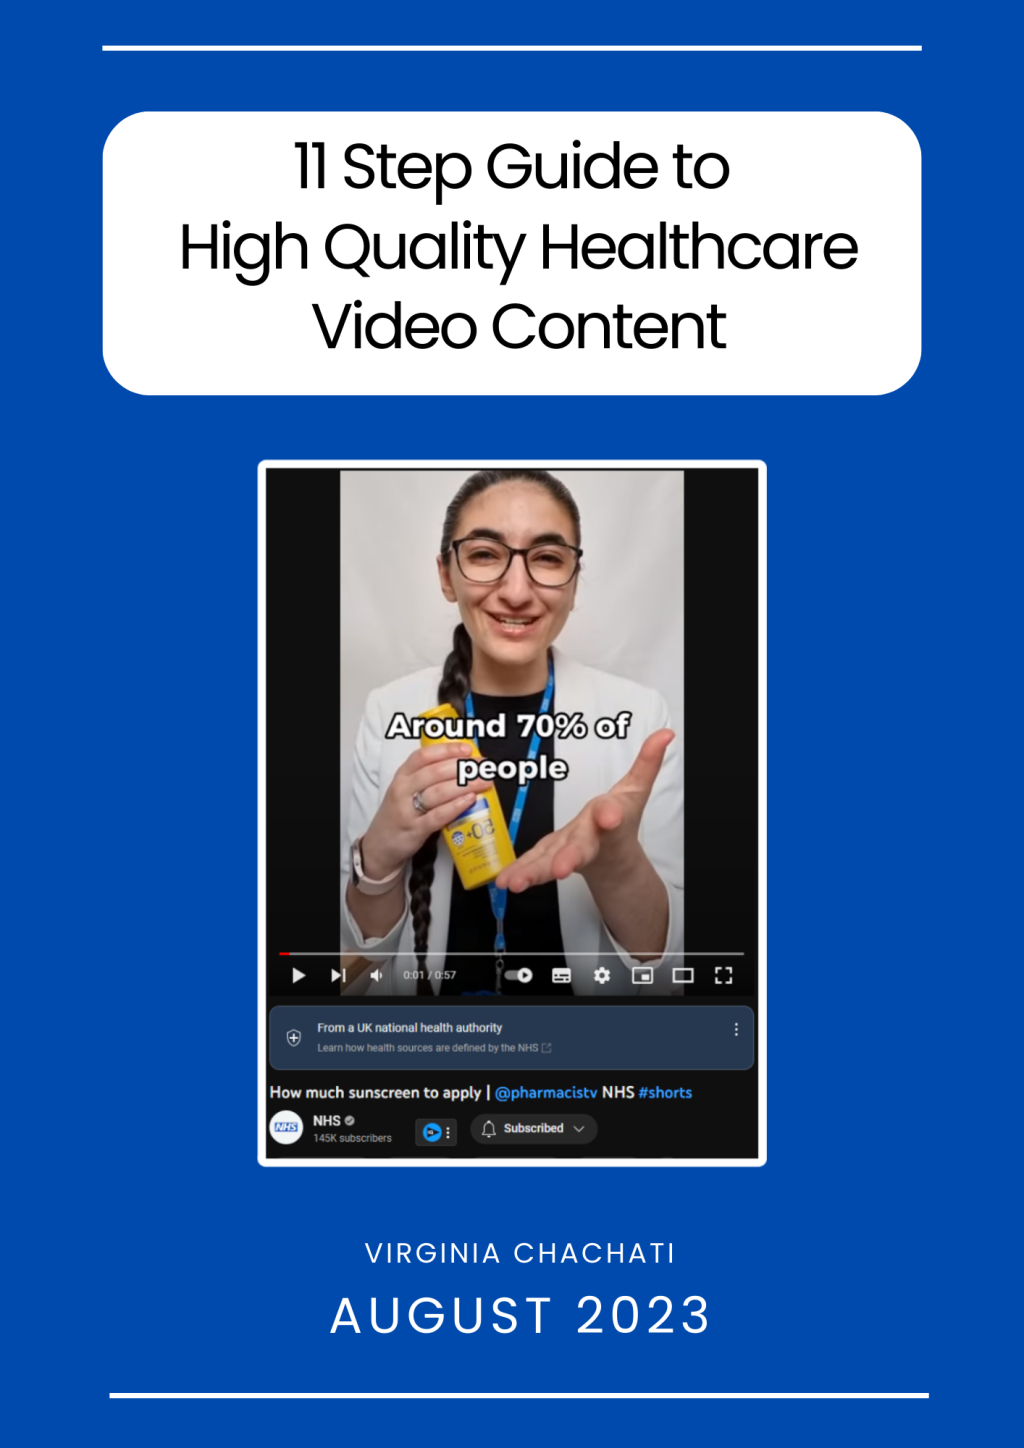 11 steps to producing high quality healthcare video content